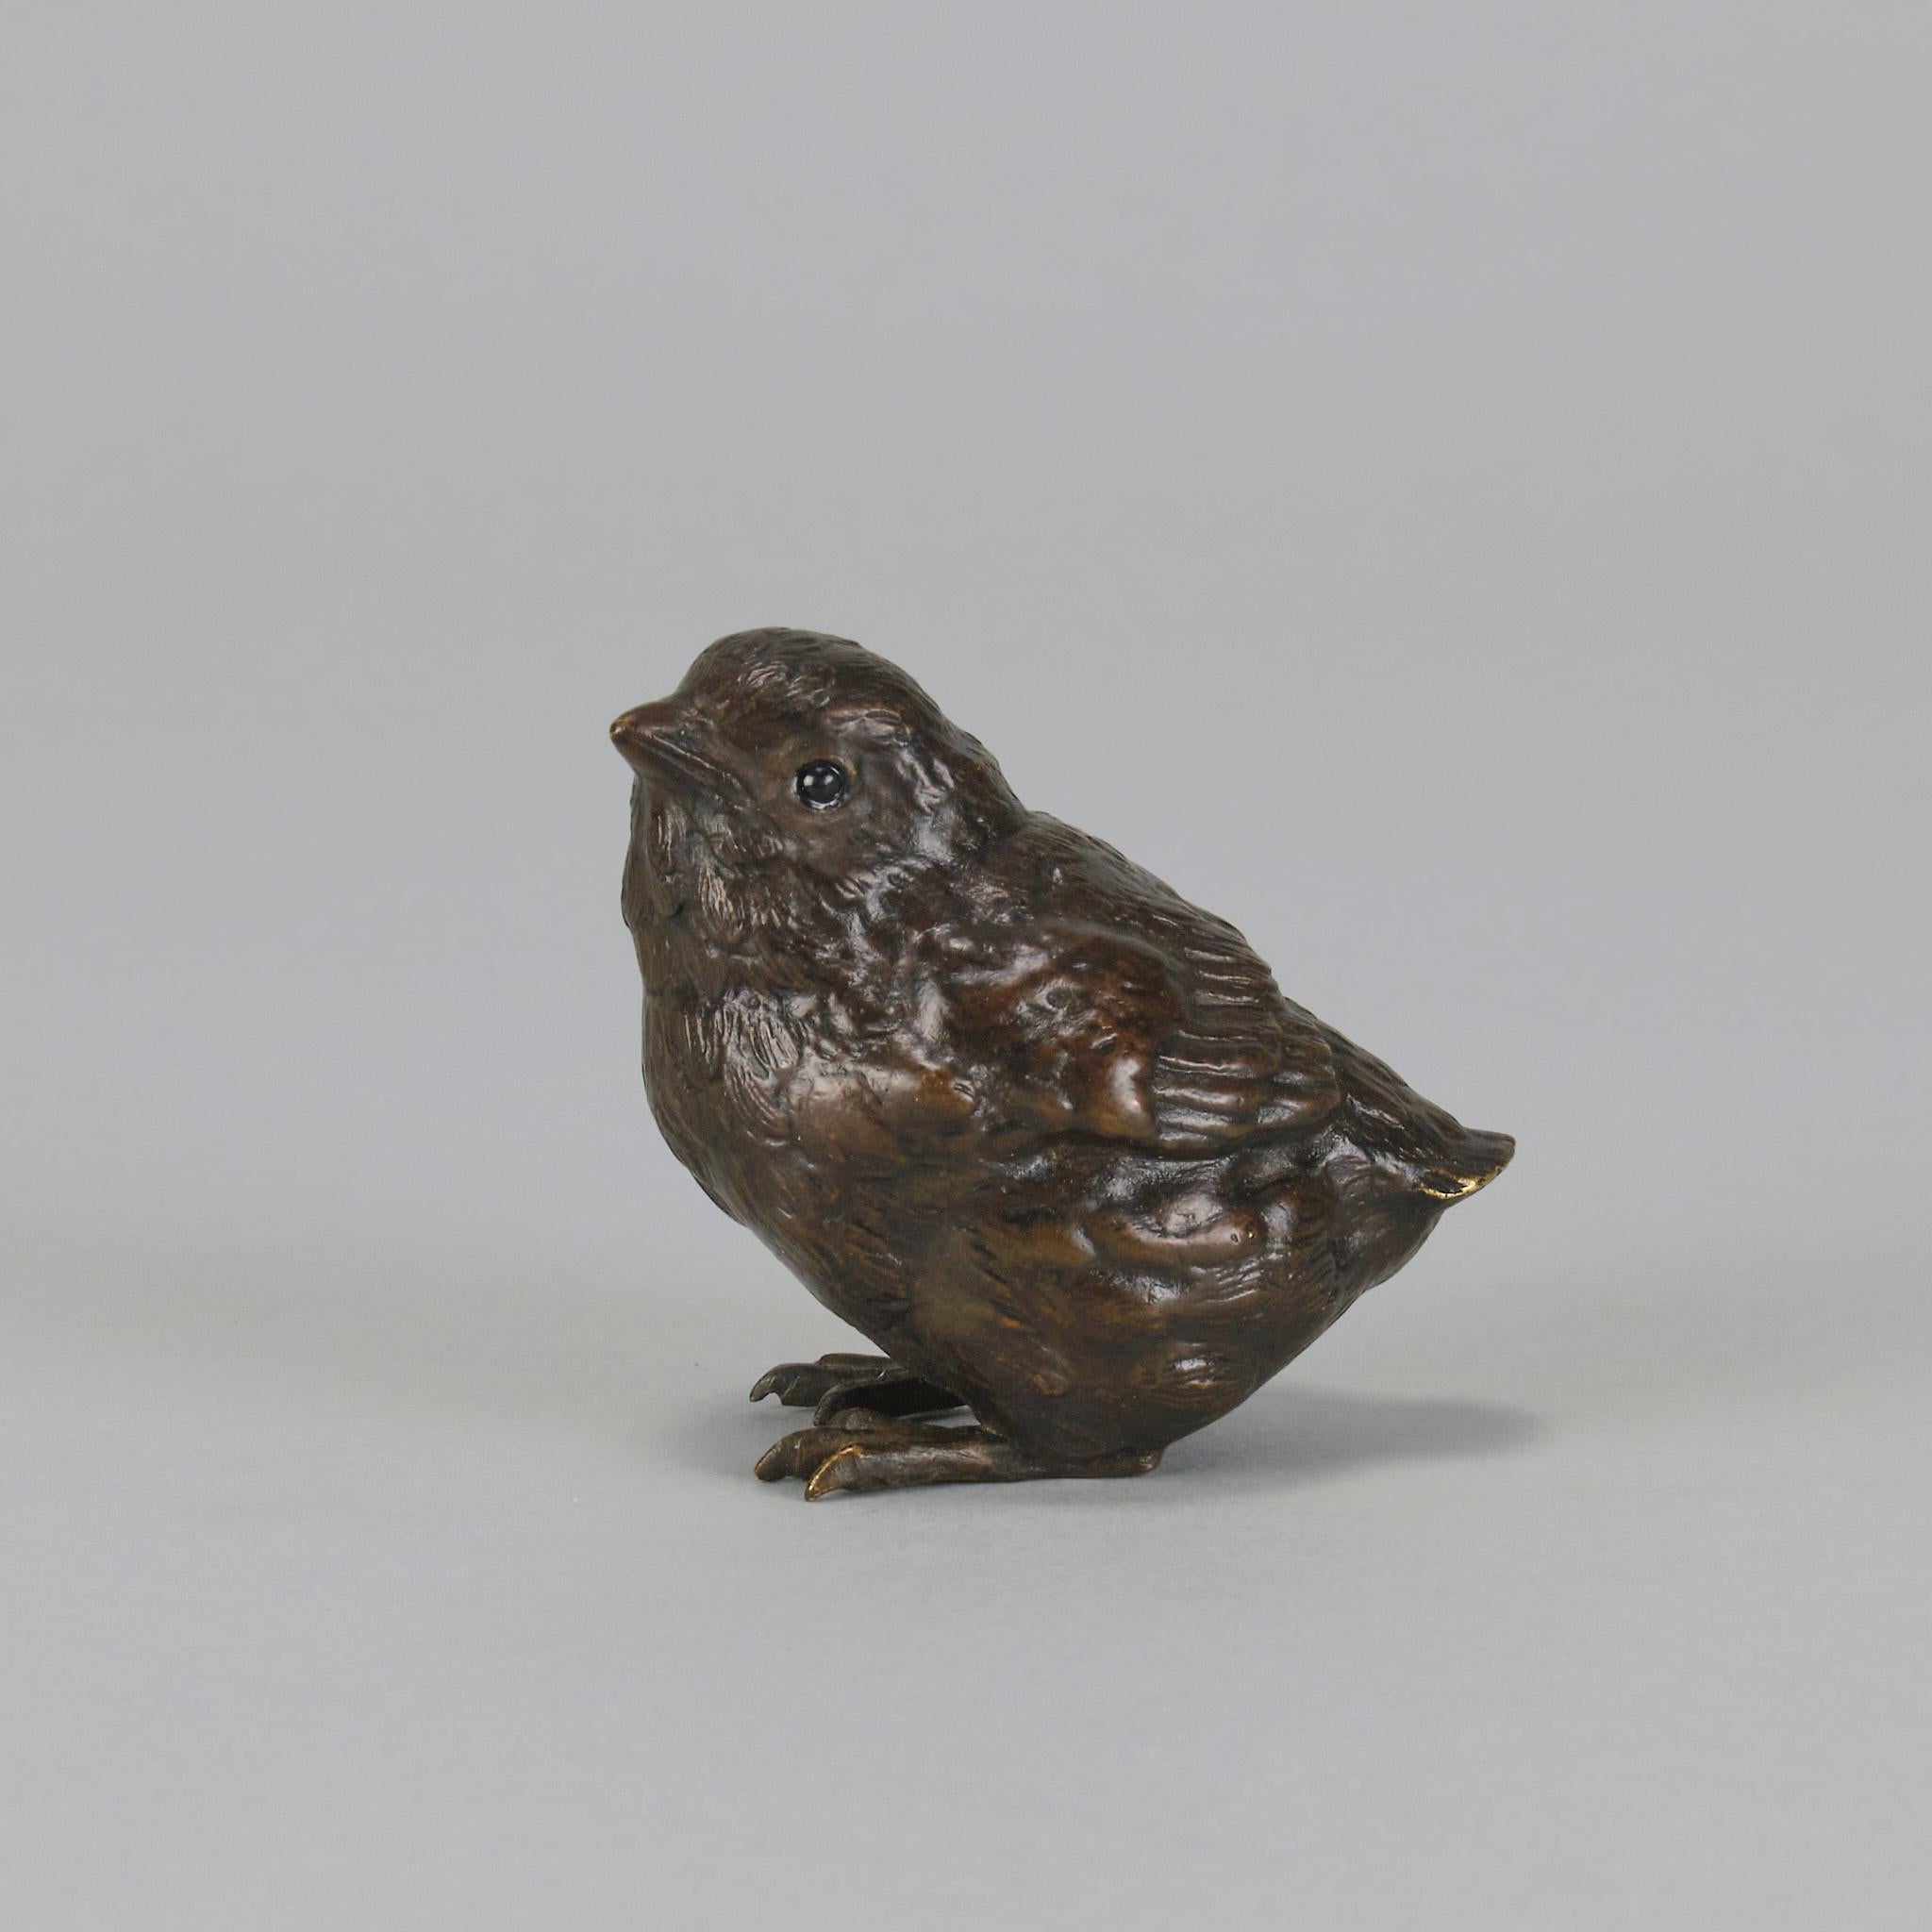 An endearing cold painted Austrian Bronze study of an alert young bird with its head raised. The bronze exhibiting rich brown colour and good hand finished surface detail

ADDITIONAL INFORMATION
height: 5.5 cm 

width: 4 cm

Condition: